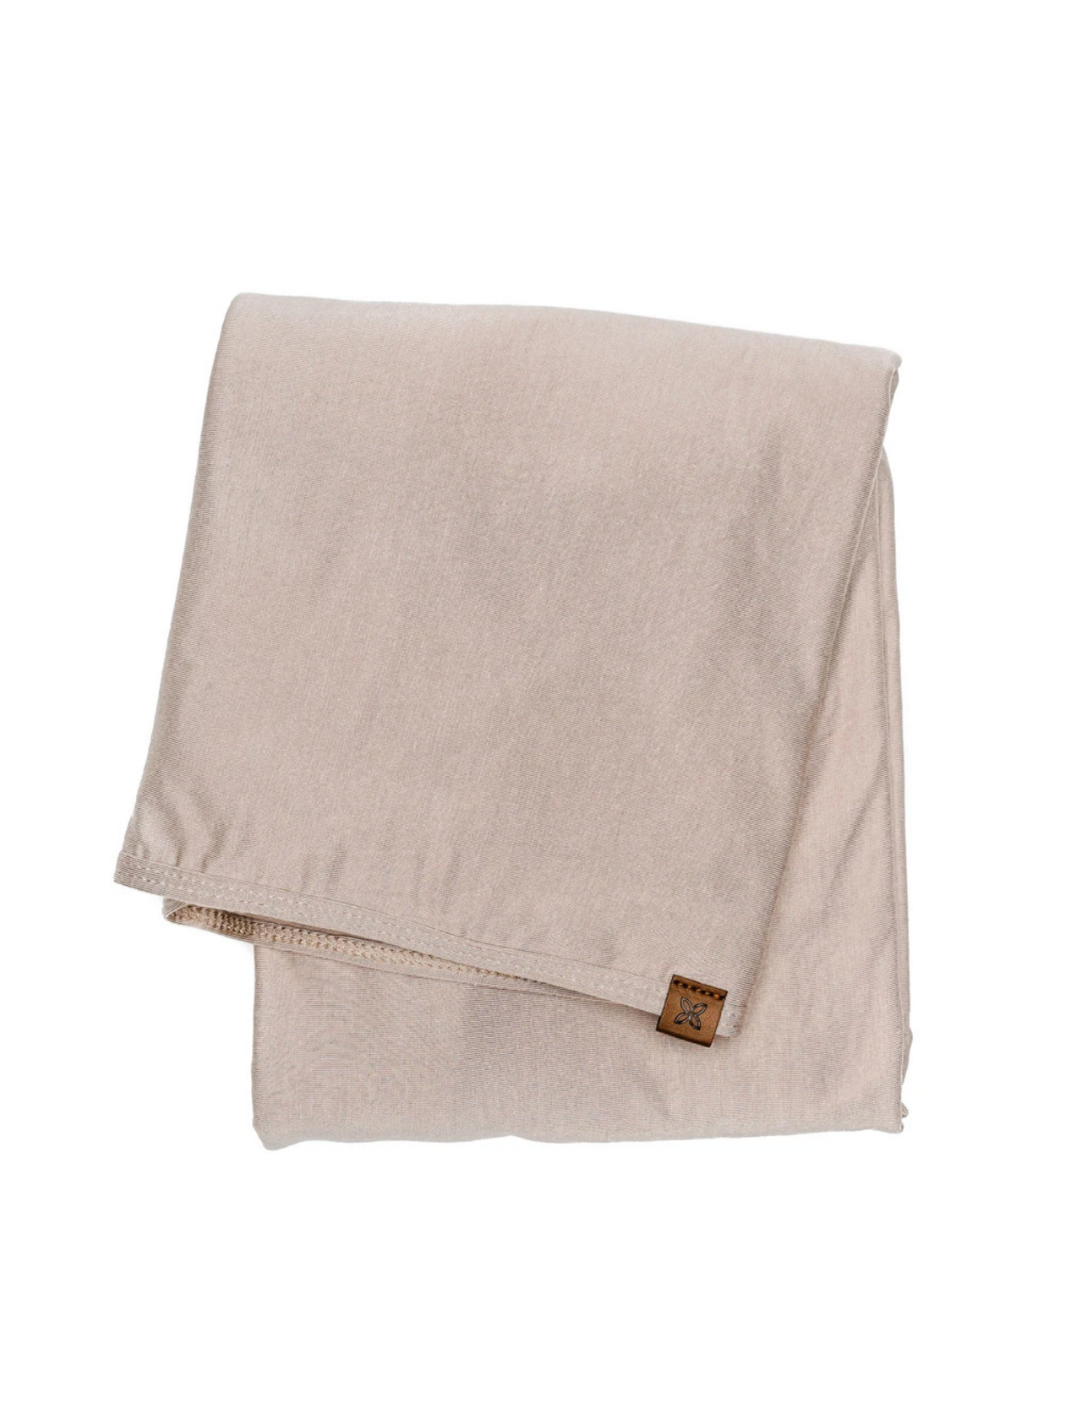 Fawn Swaddle 48" X 48"